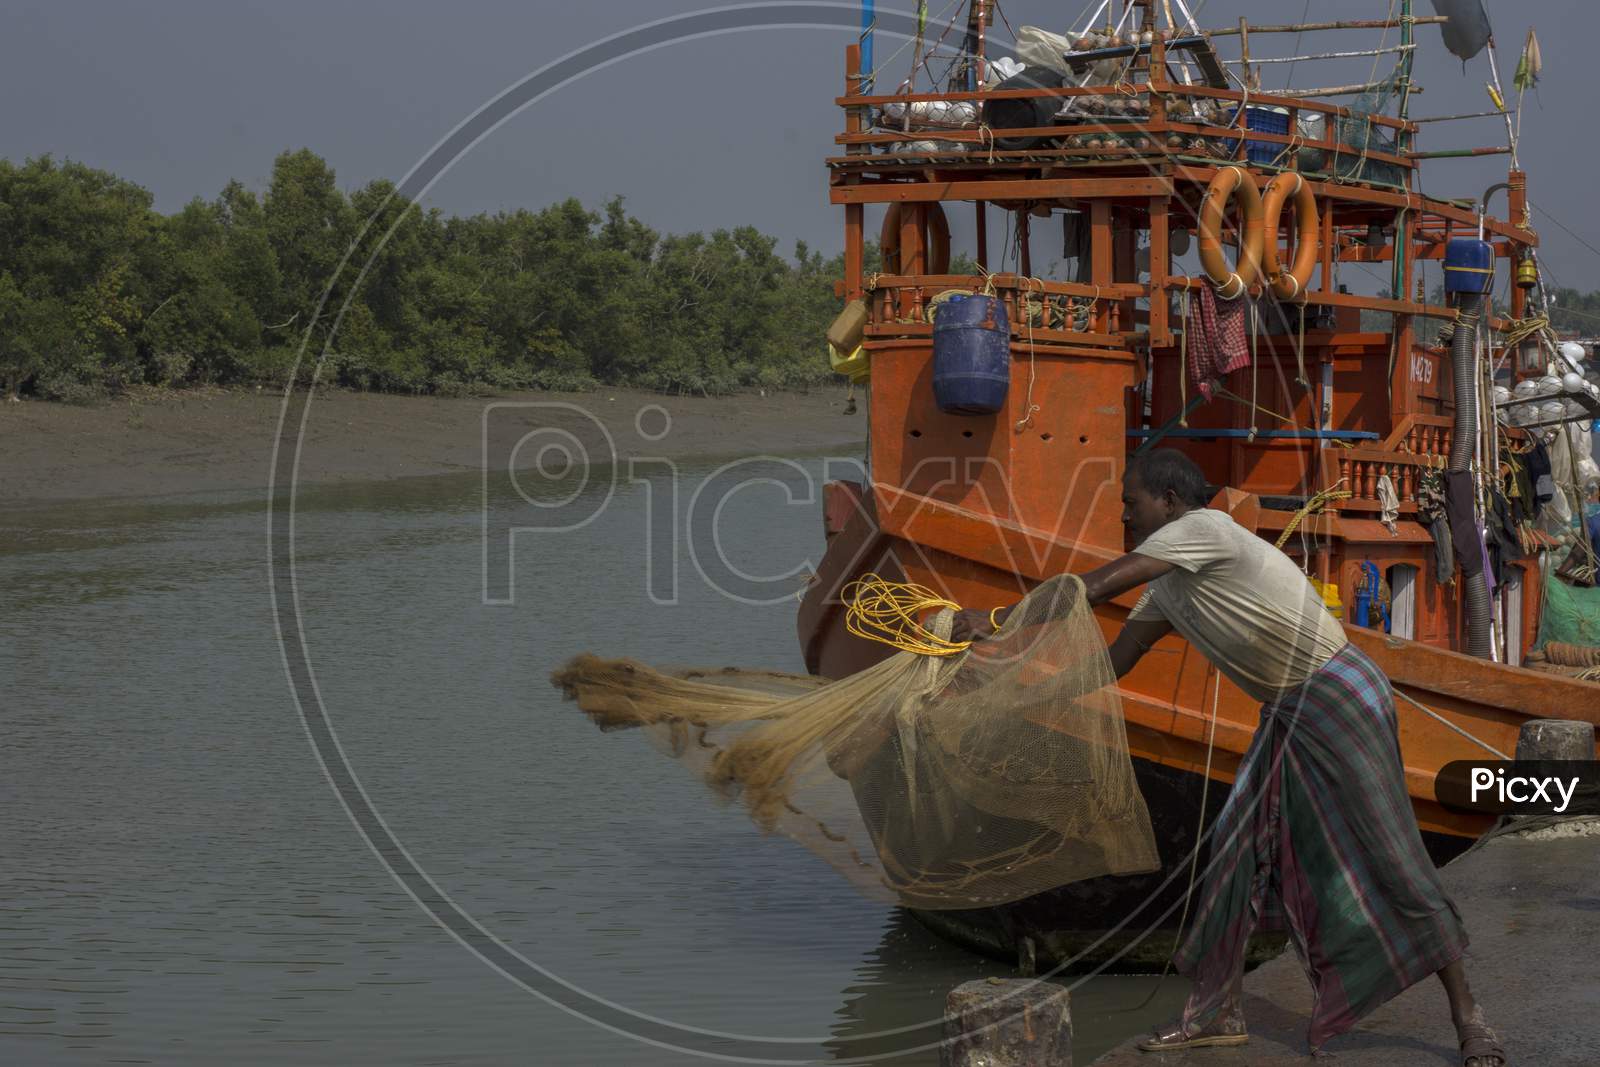 Image of A Fisherman Throwing His Fishing Net At Water For Catching Fish,  His Boat Is In Background.-SF973302-Picxy